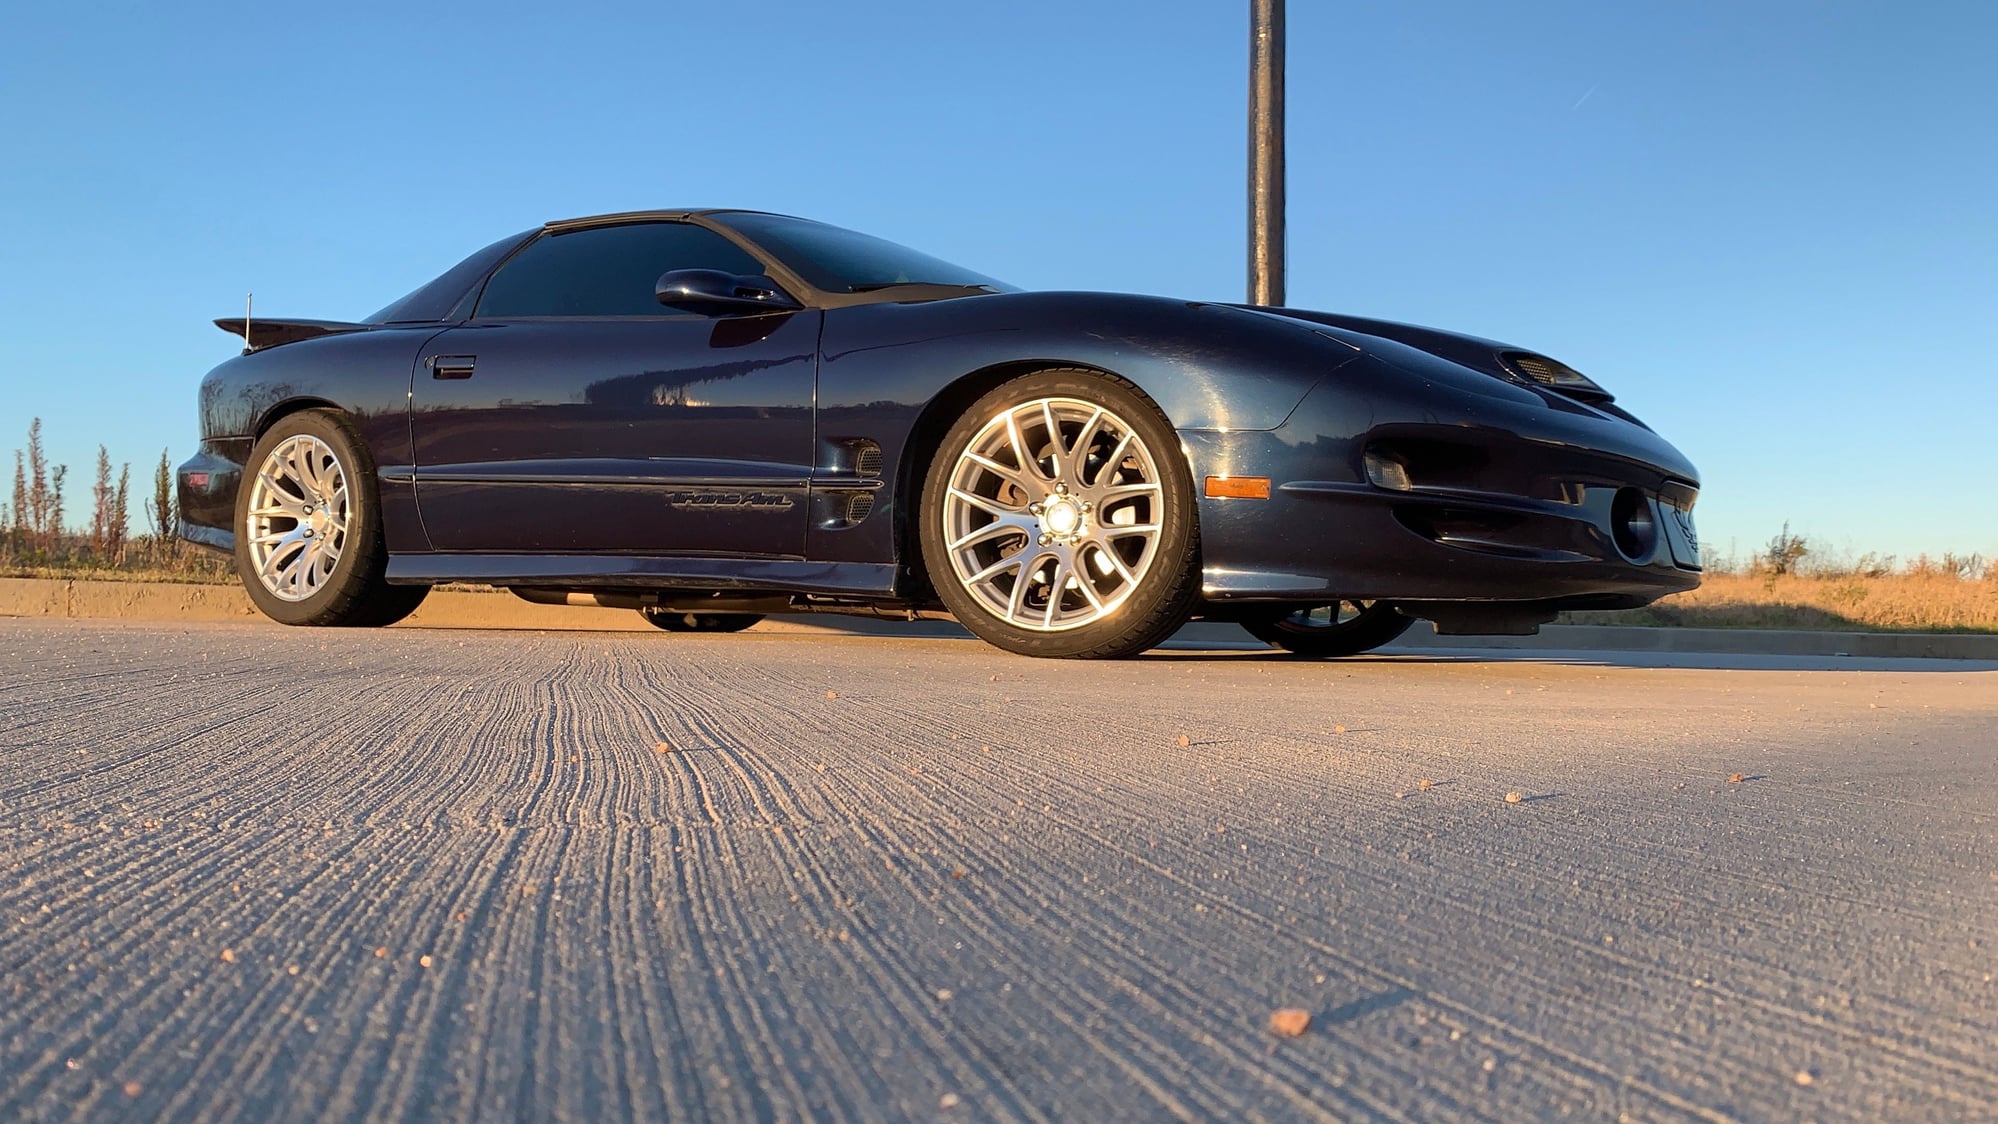 1998 - 2002 Pontiac Firebird - Looking to buy 98-02 Trans am Roller - New or Used - 8 cyl - Manual - Houston, TX 77373, United States